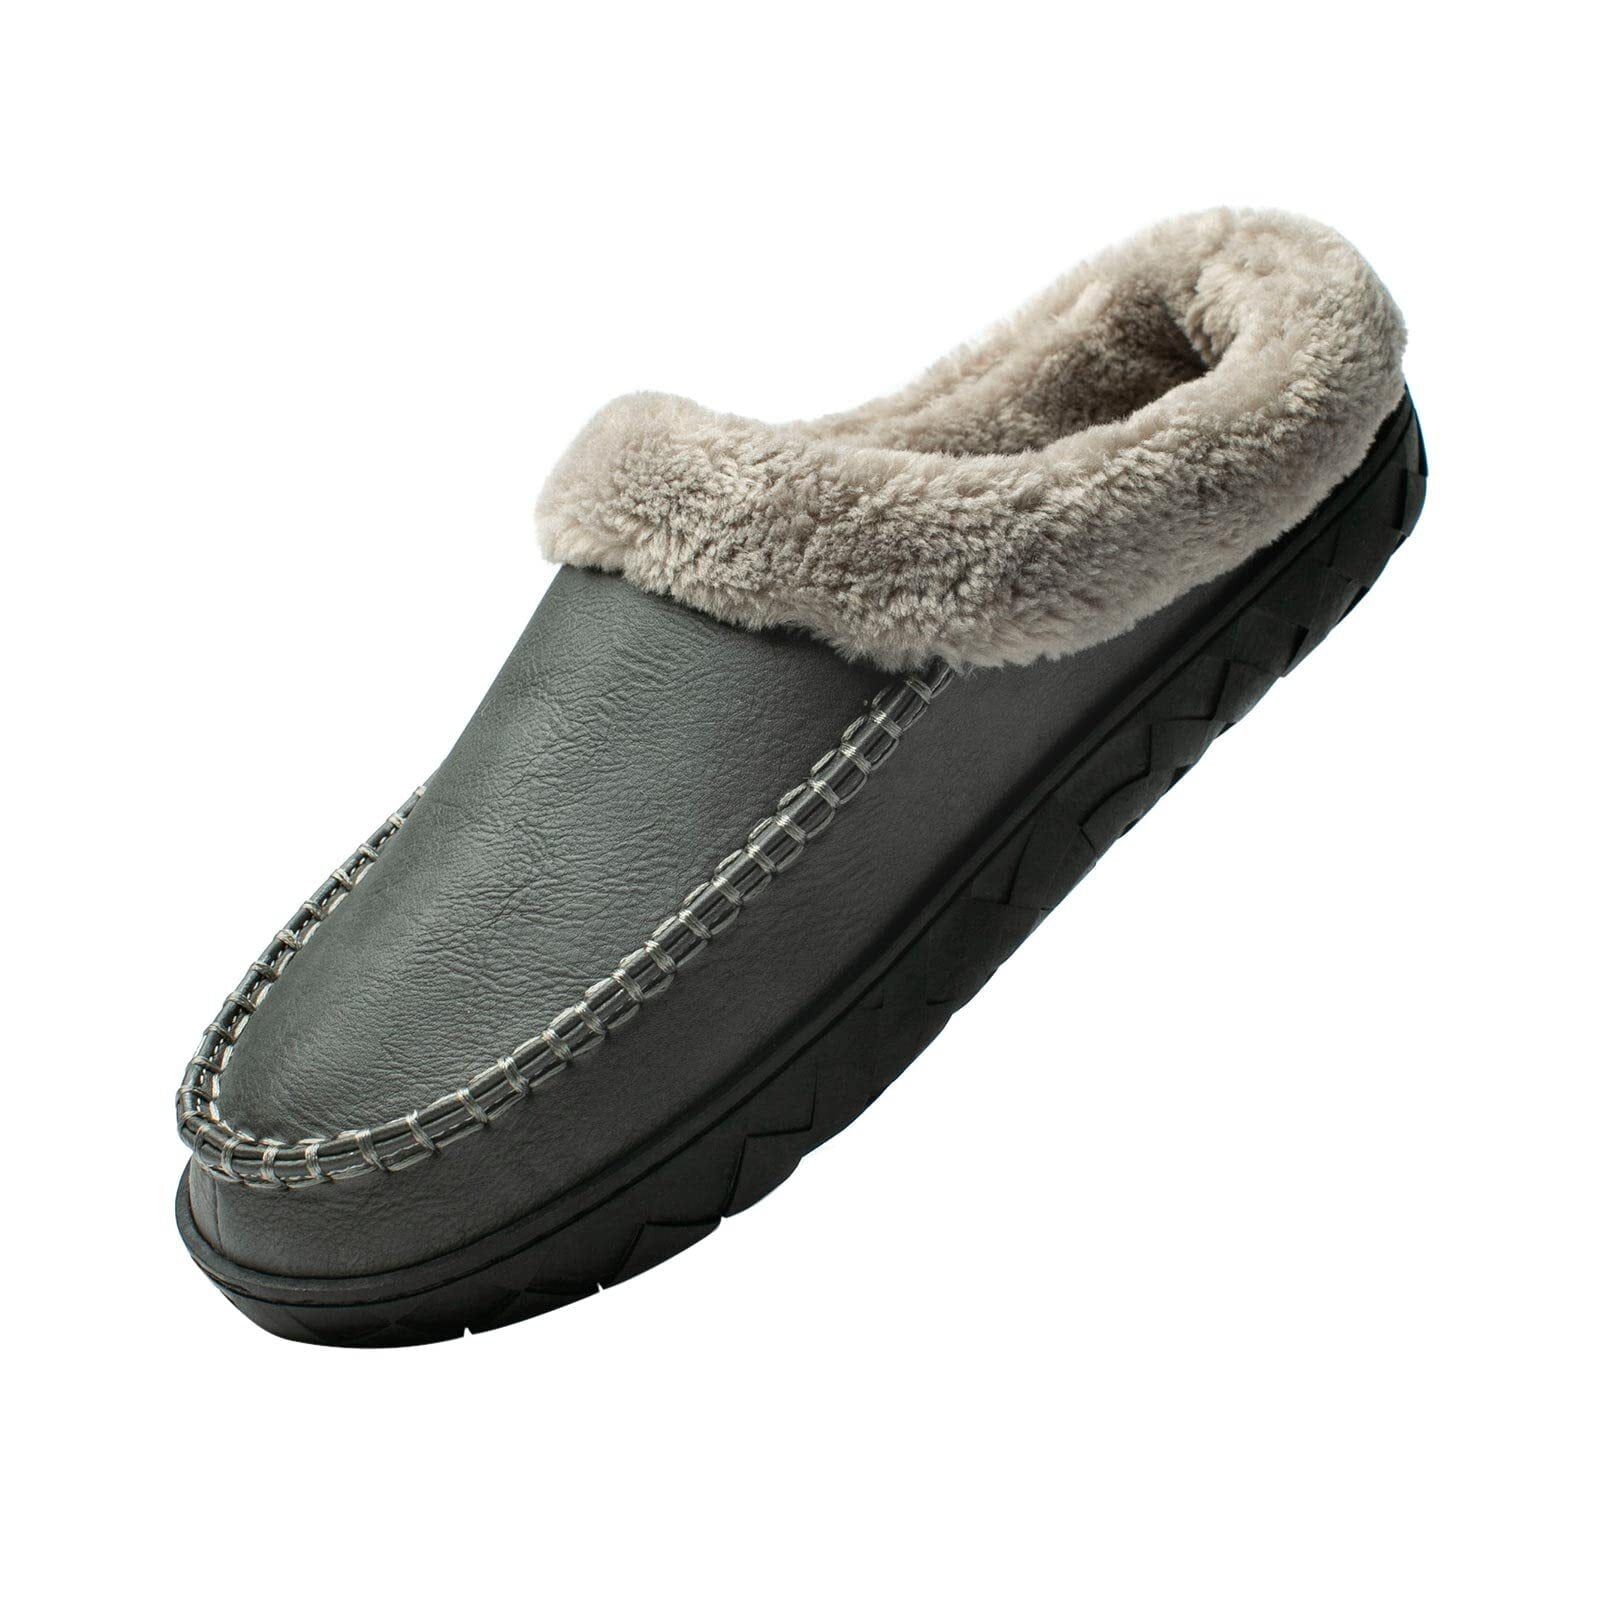 Needbo Men's Moccasin Slippers Faux Leather Fuzzy Lined House Shoes ...